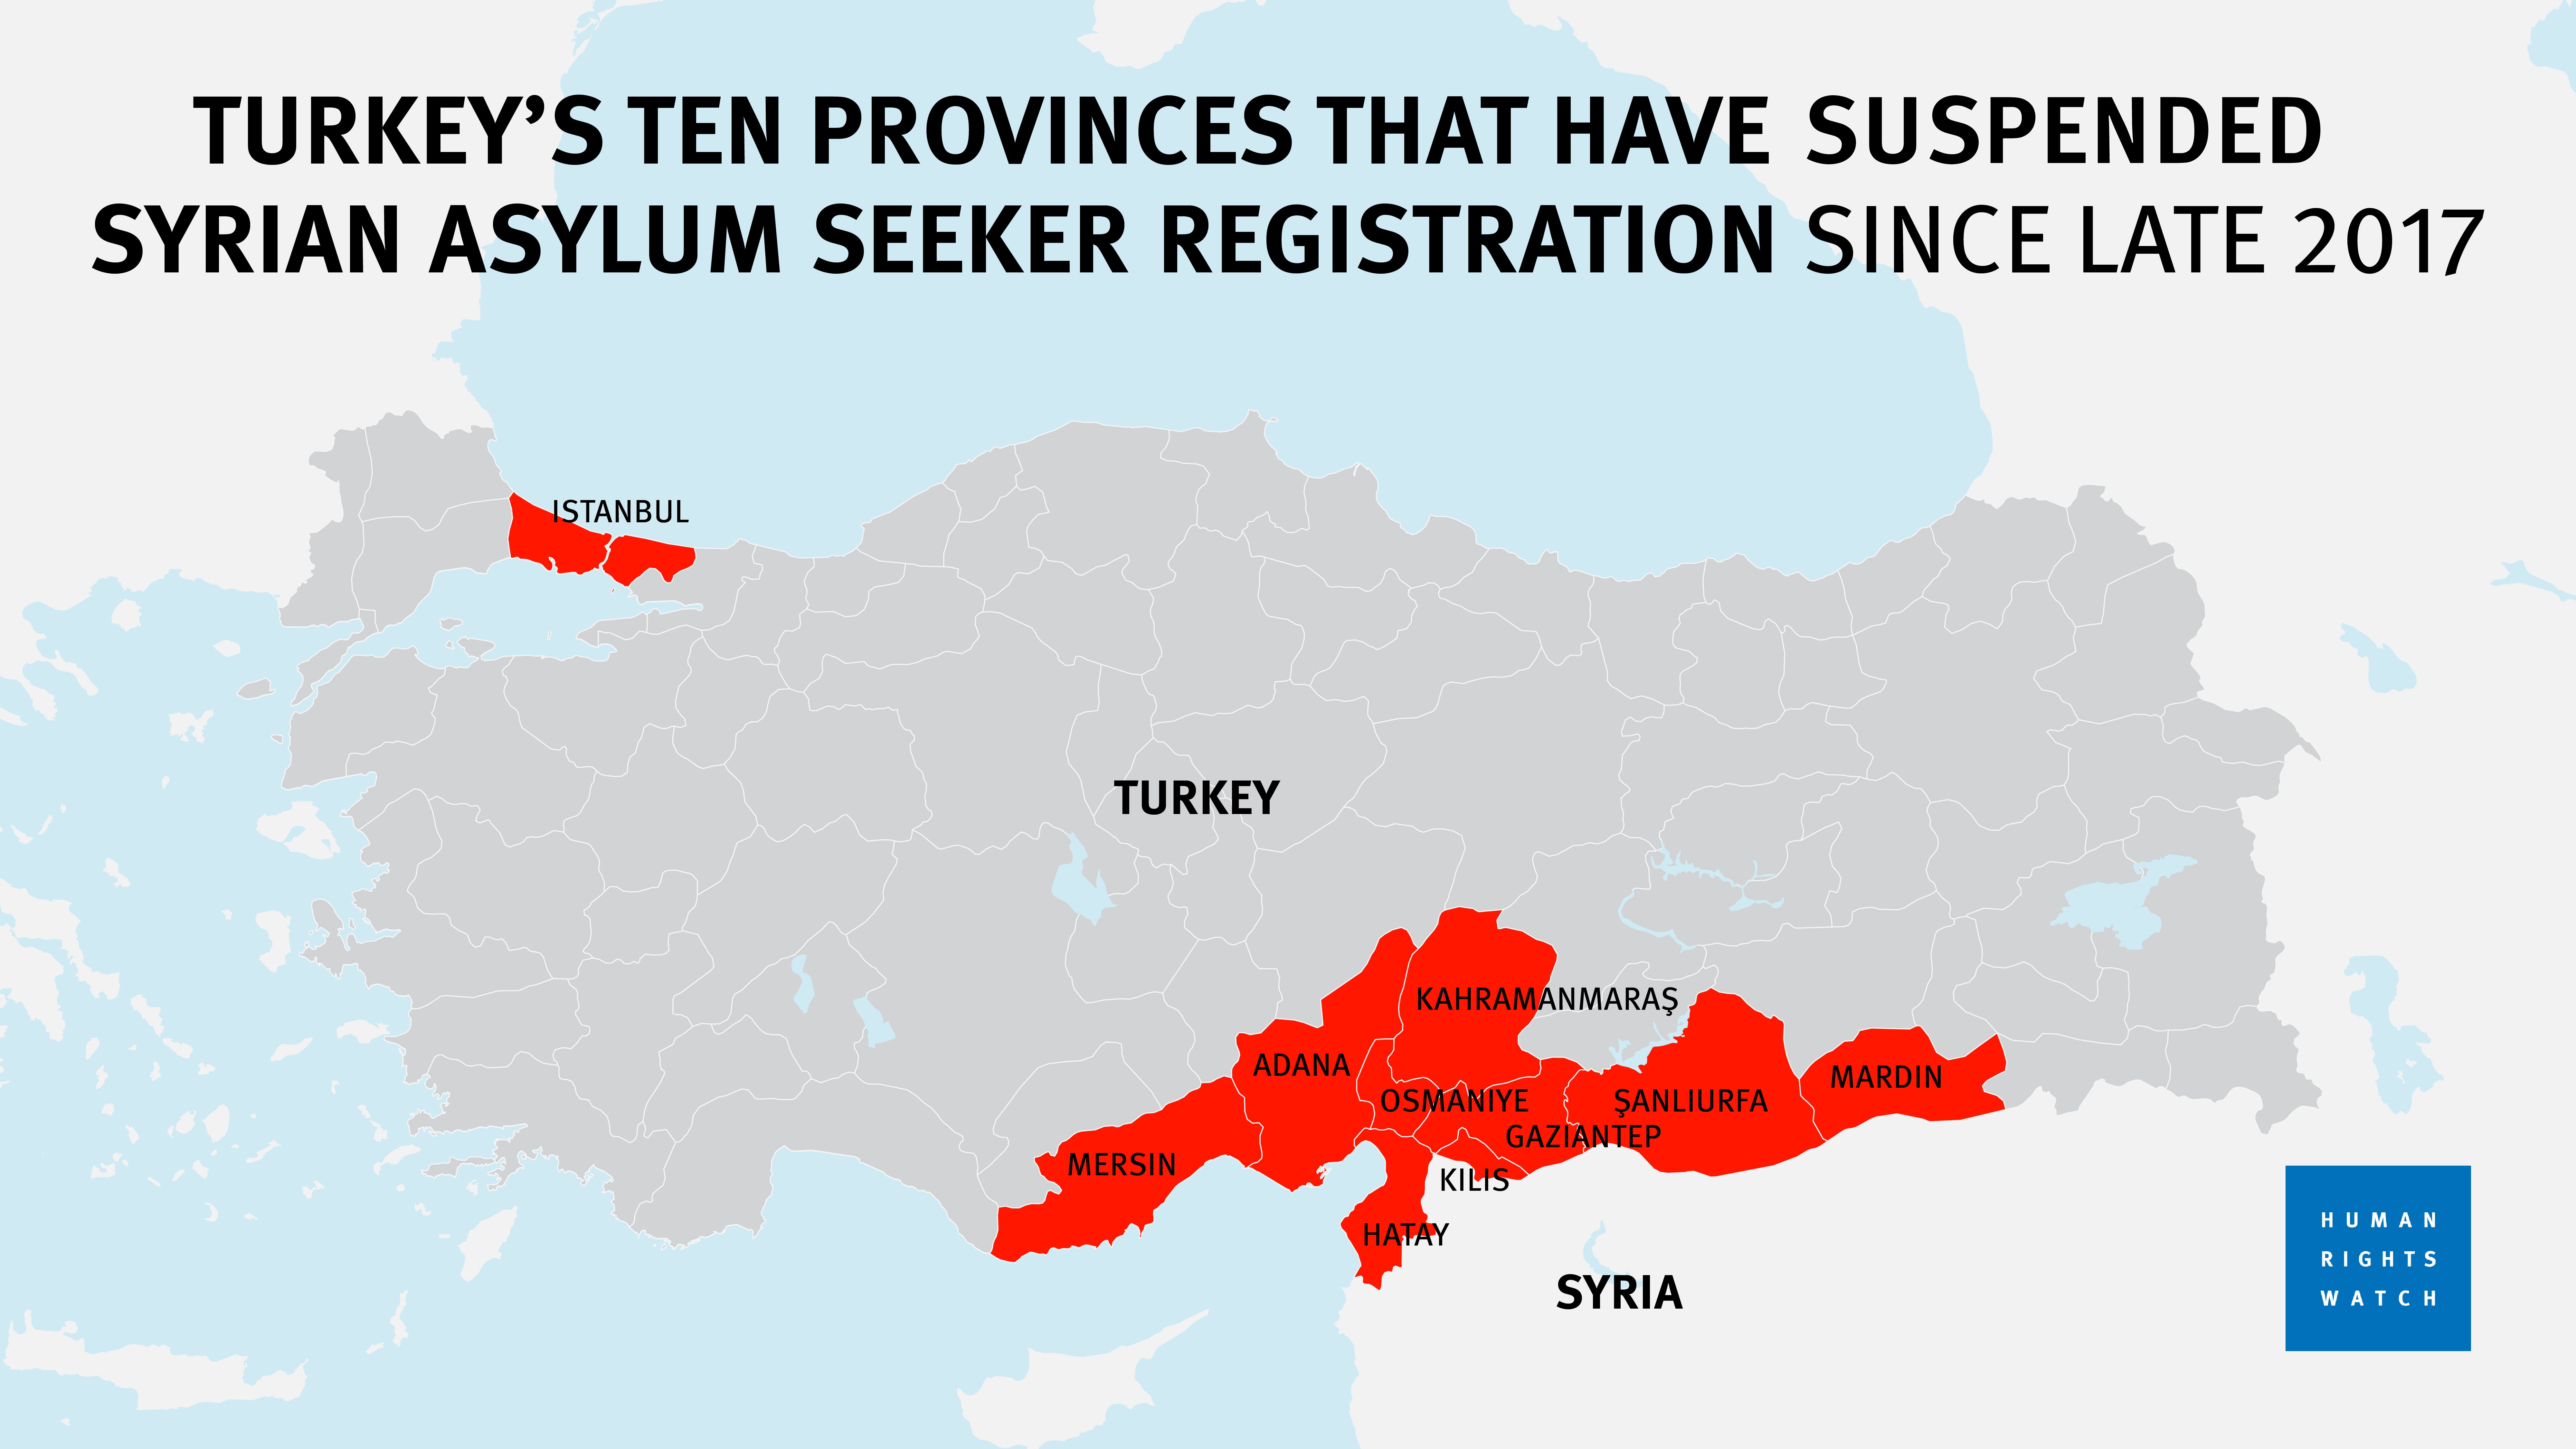 Map of ten provinces in Turkey that have suspended asylum seeker registration since late 2017.